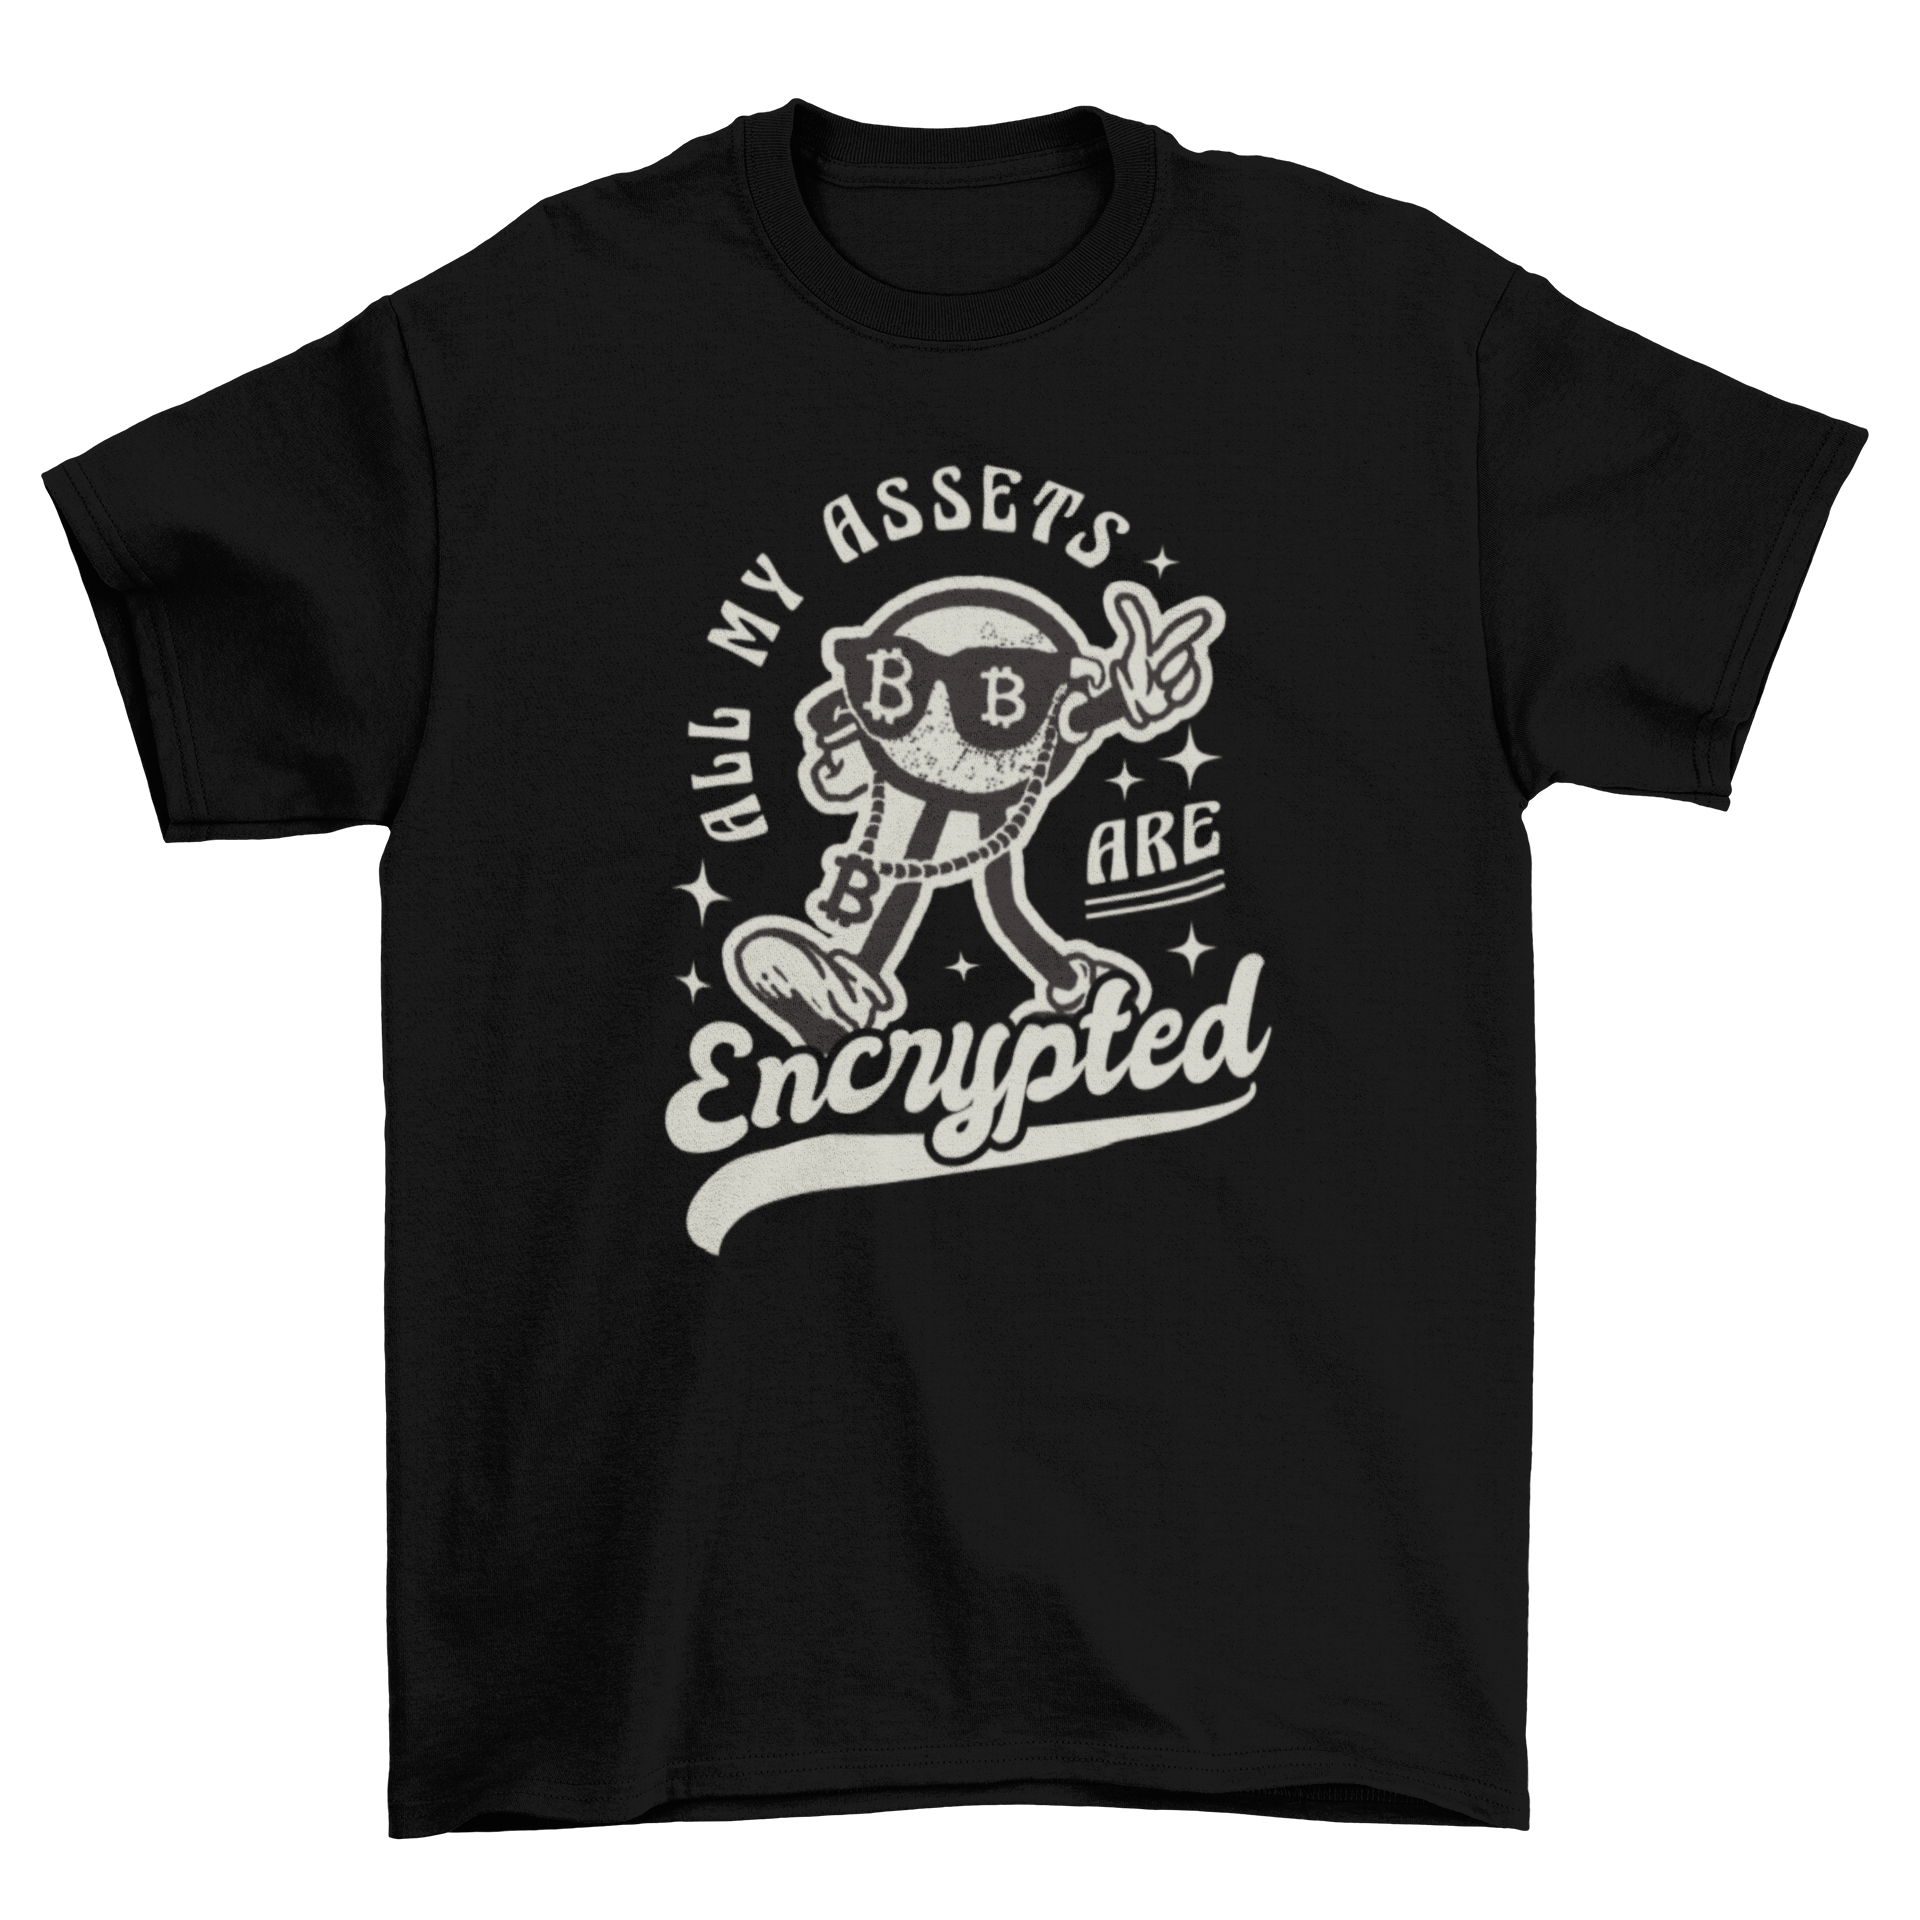 All My Assets Are Encrypted t-shirt